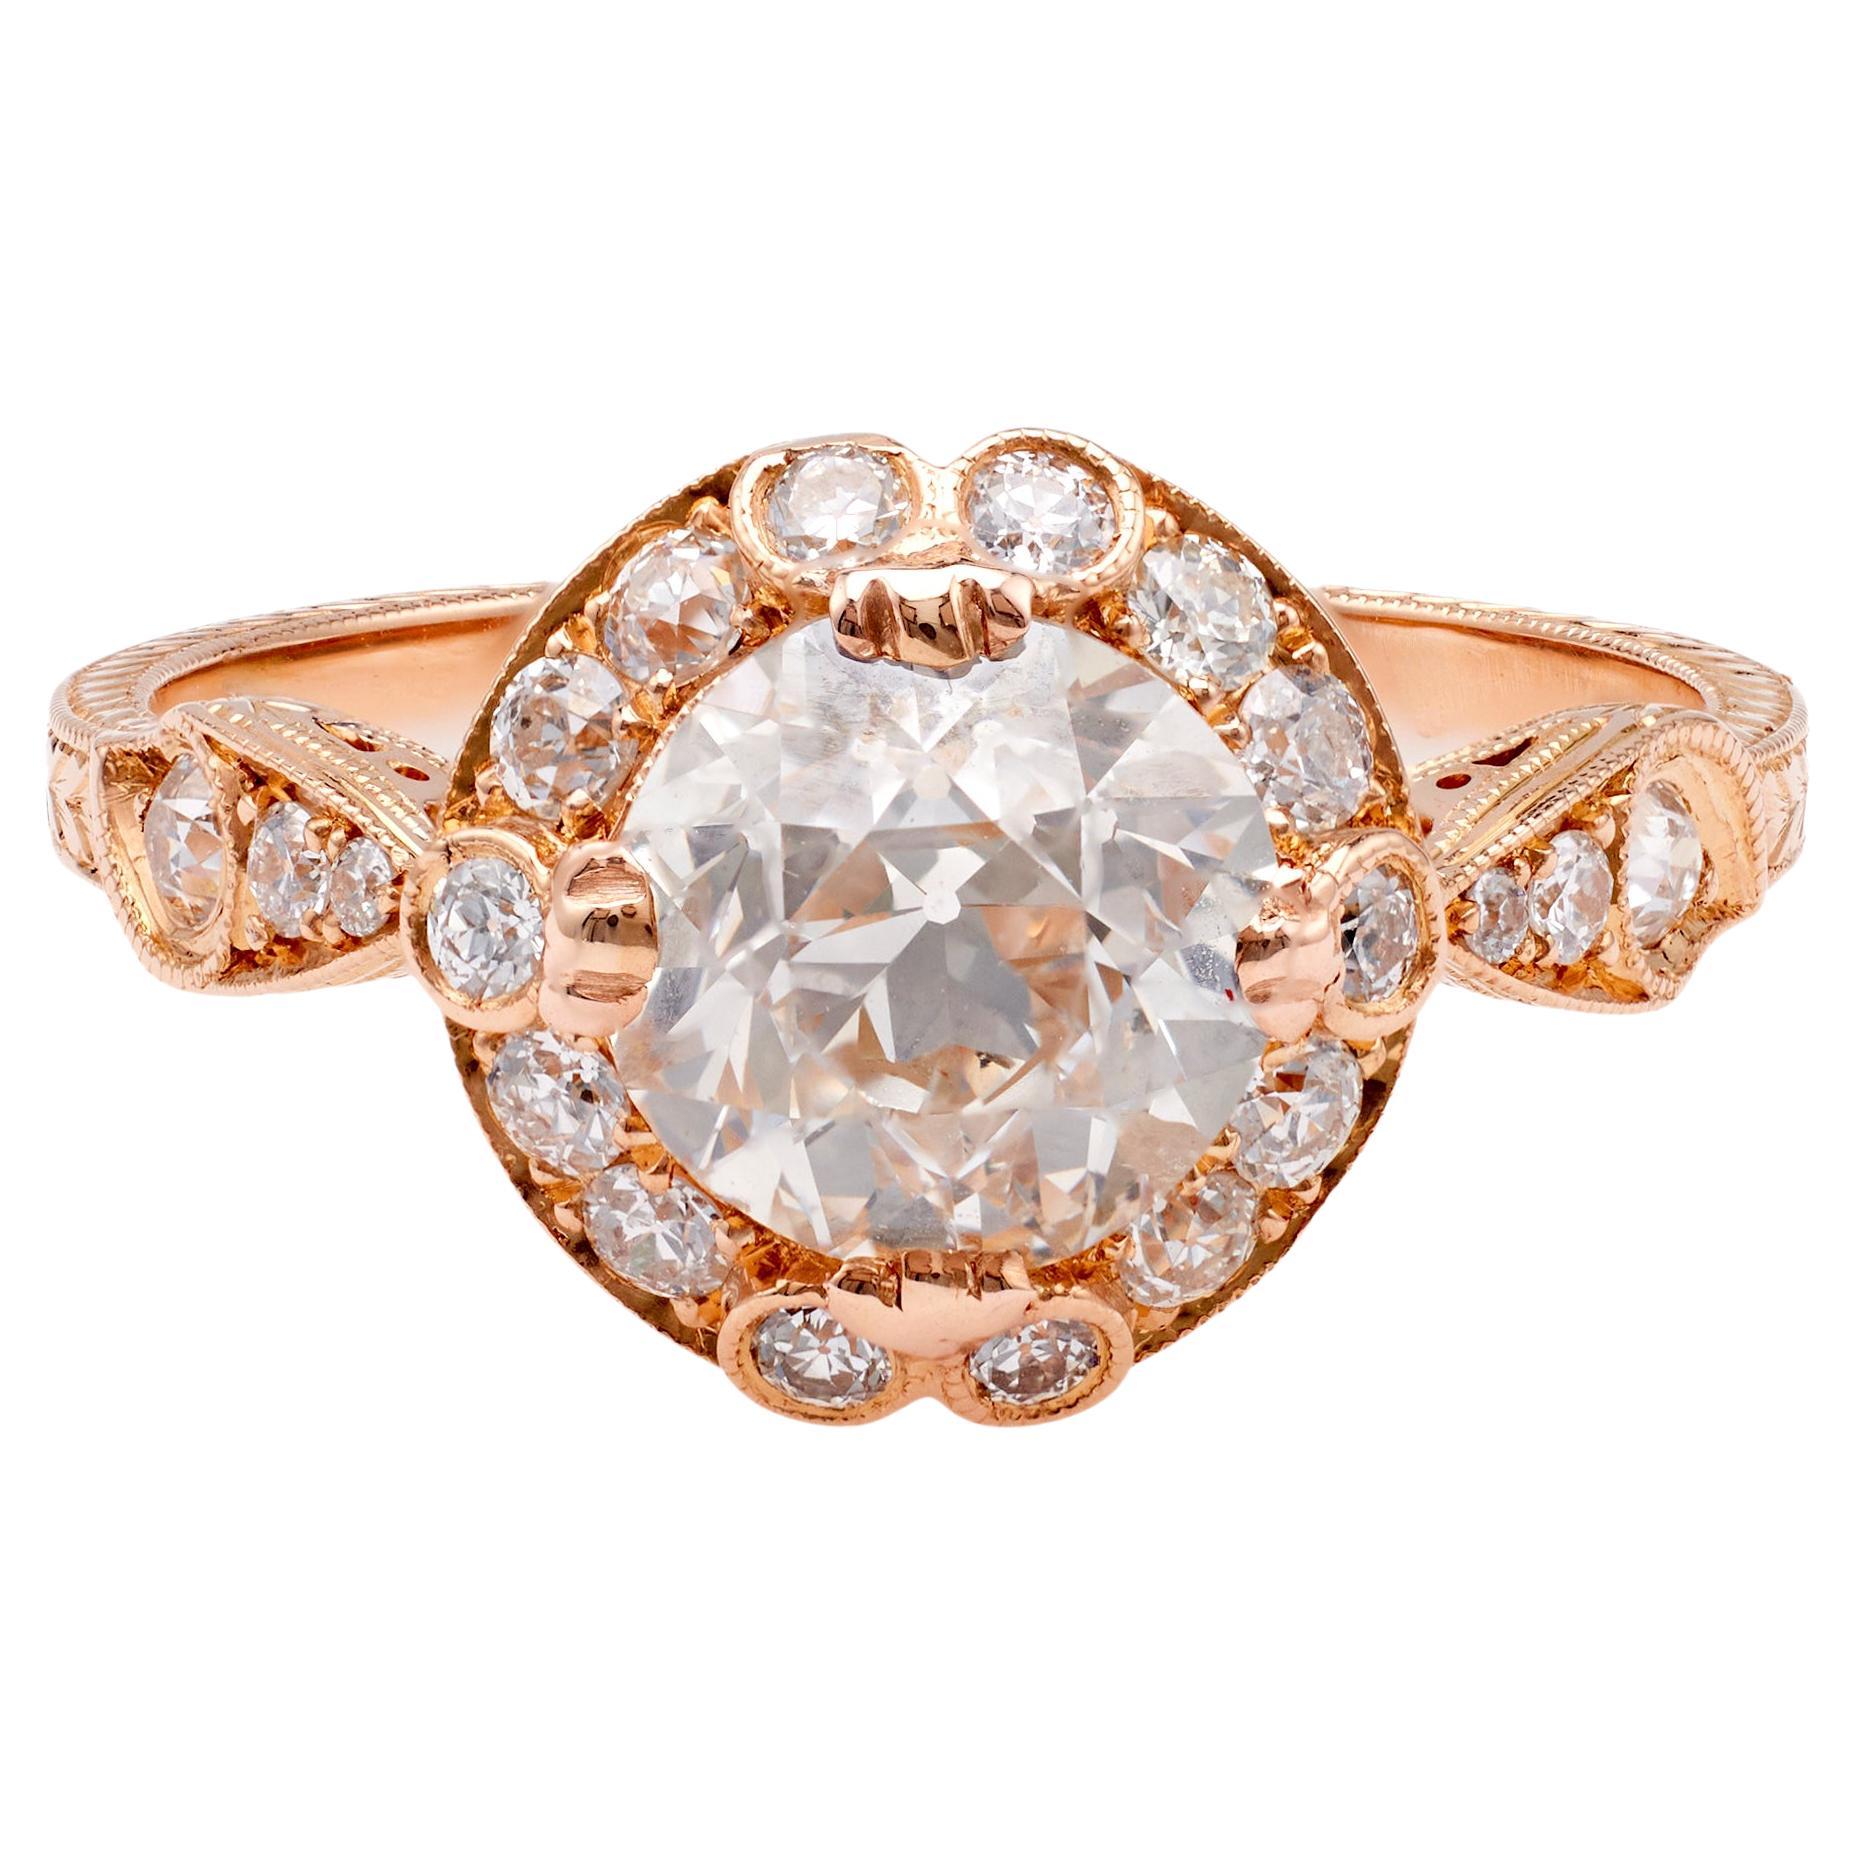 Antique Inspired GIA 1.51 Carats Old European Cut Diamond 18k Rose Gold Filigree For Sale